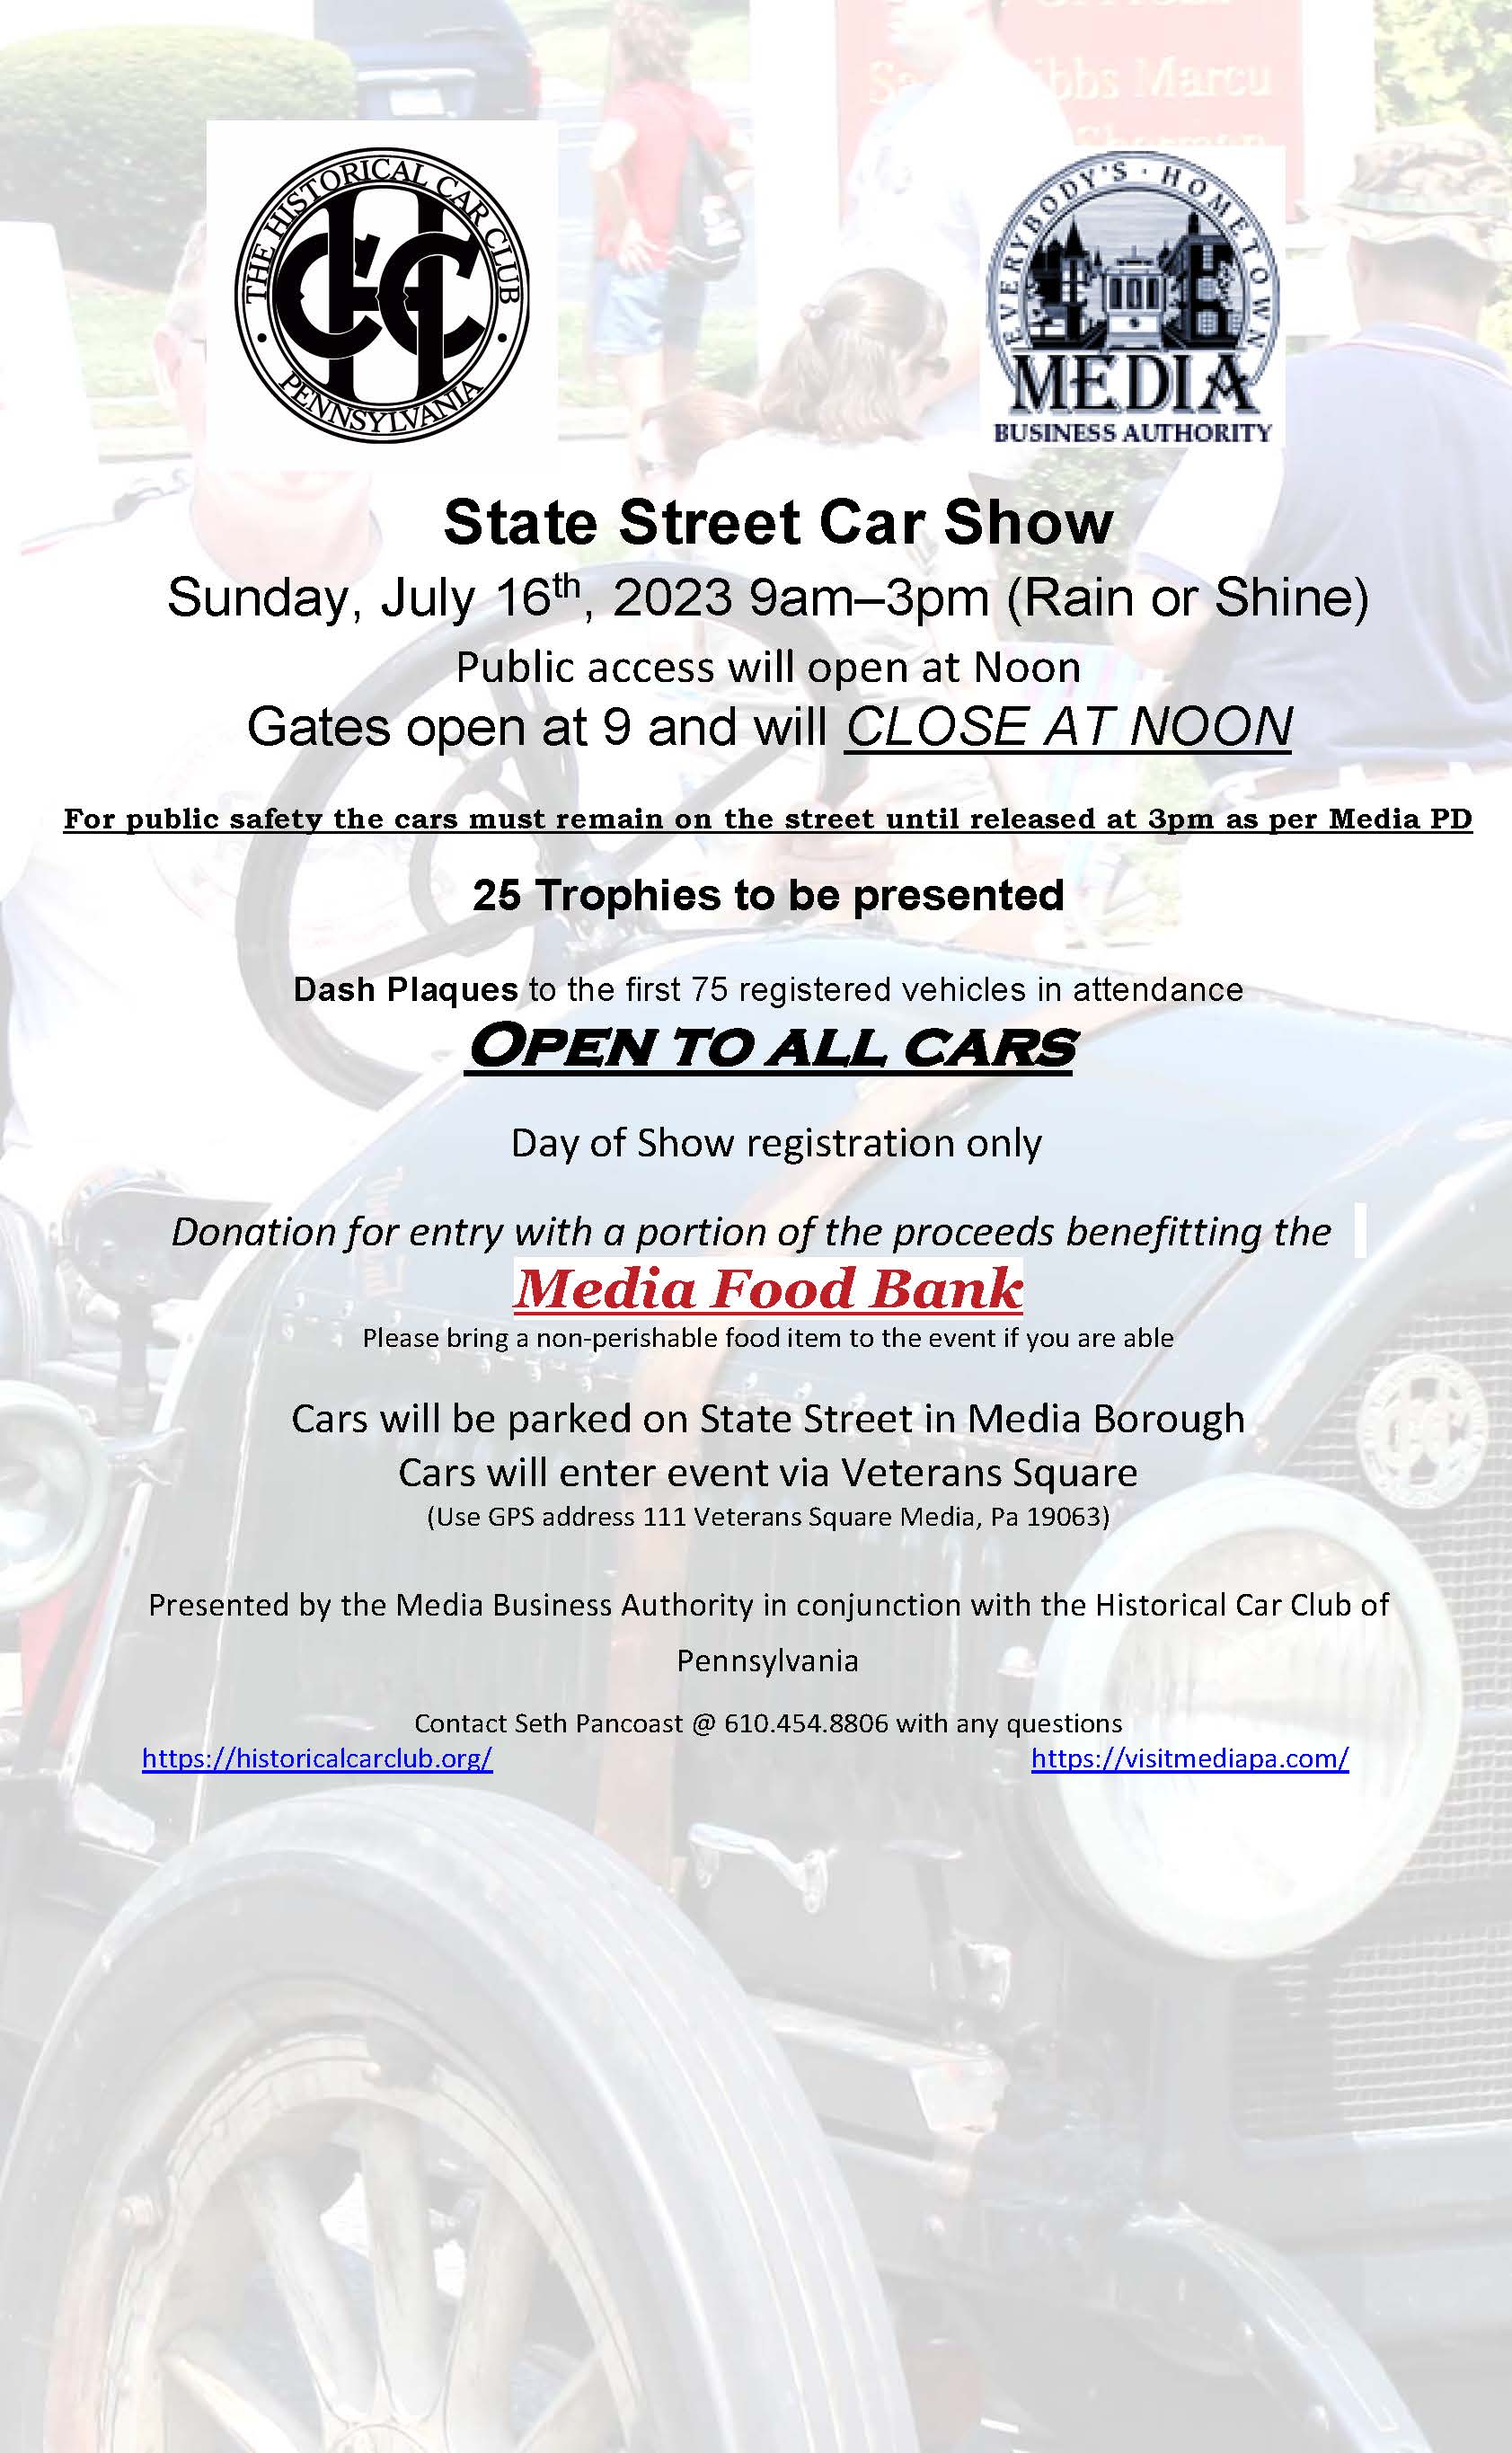 State Street Car Show July 16th